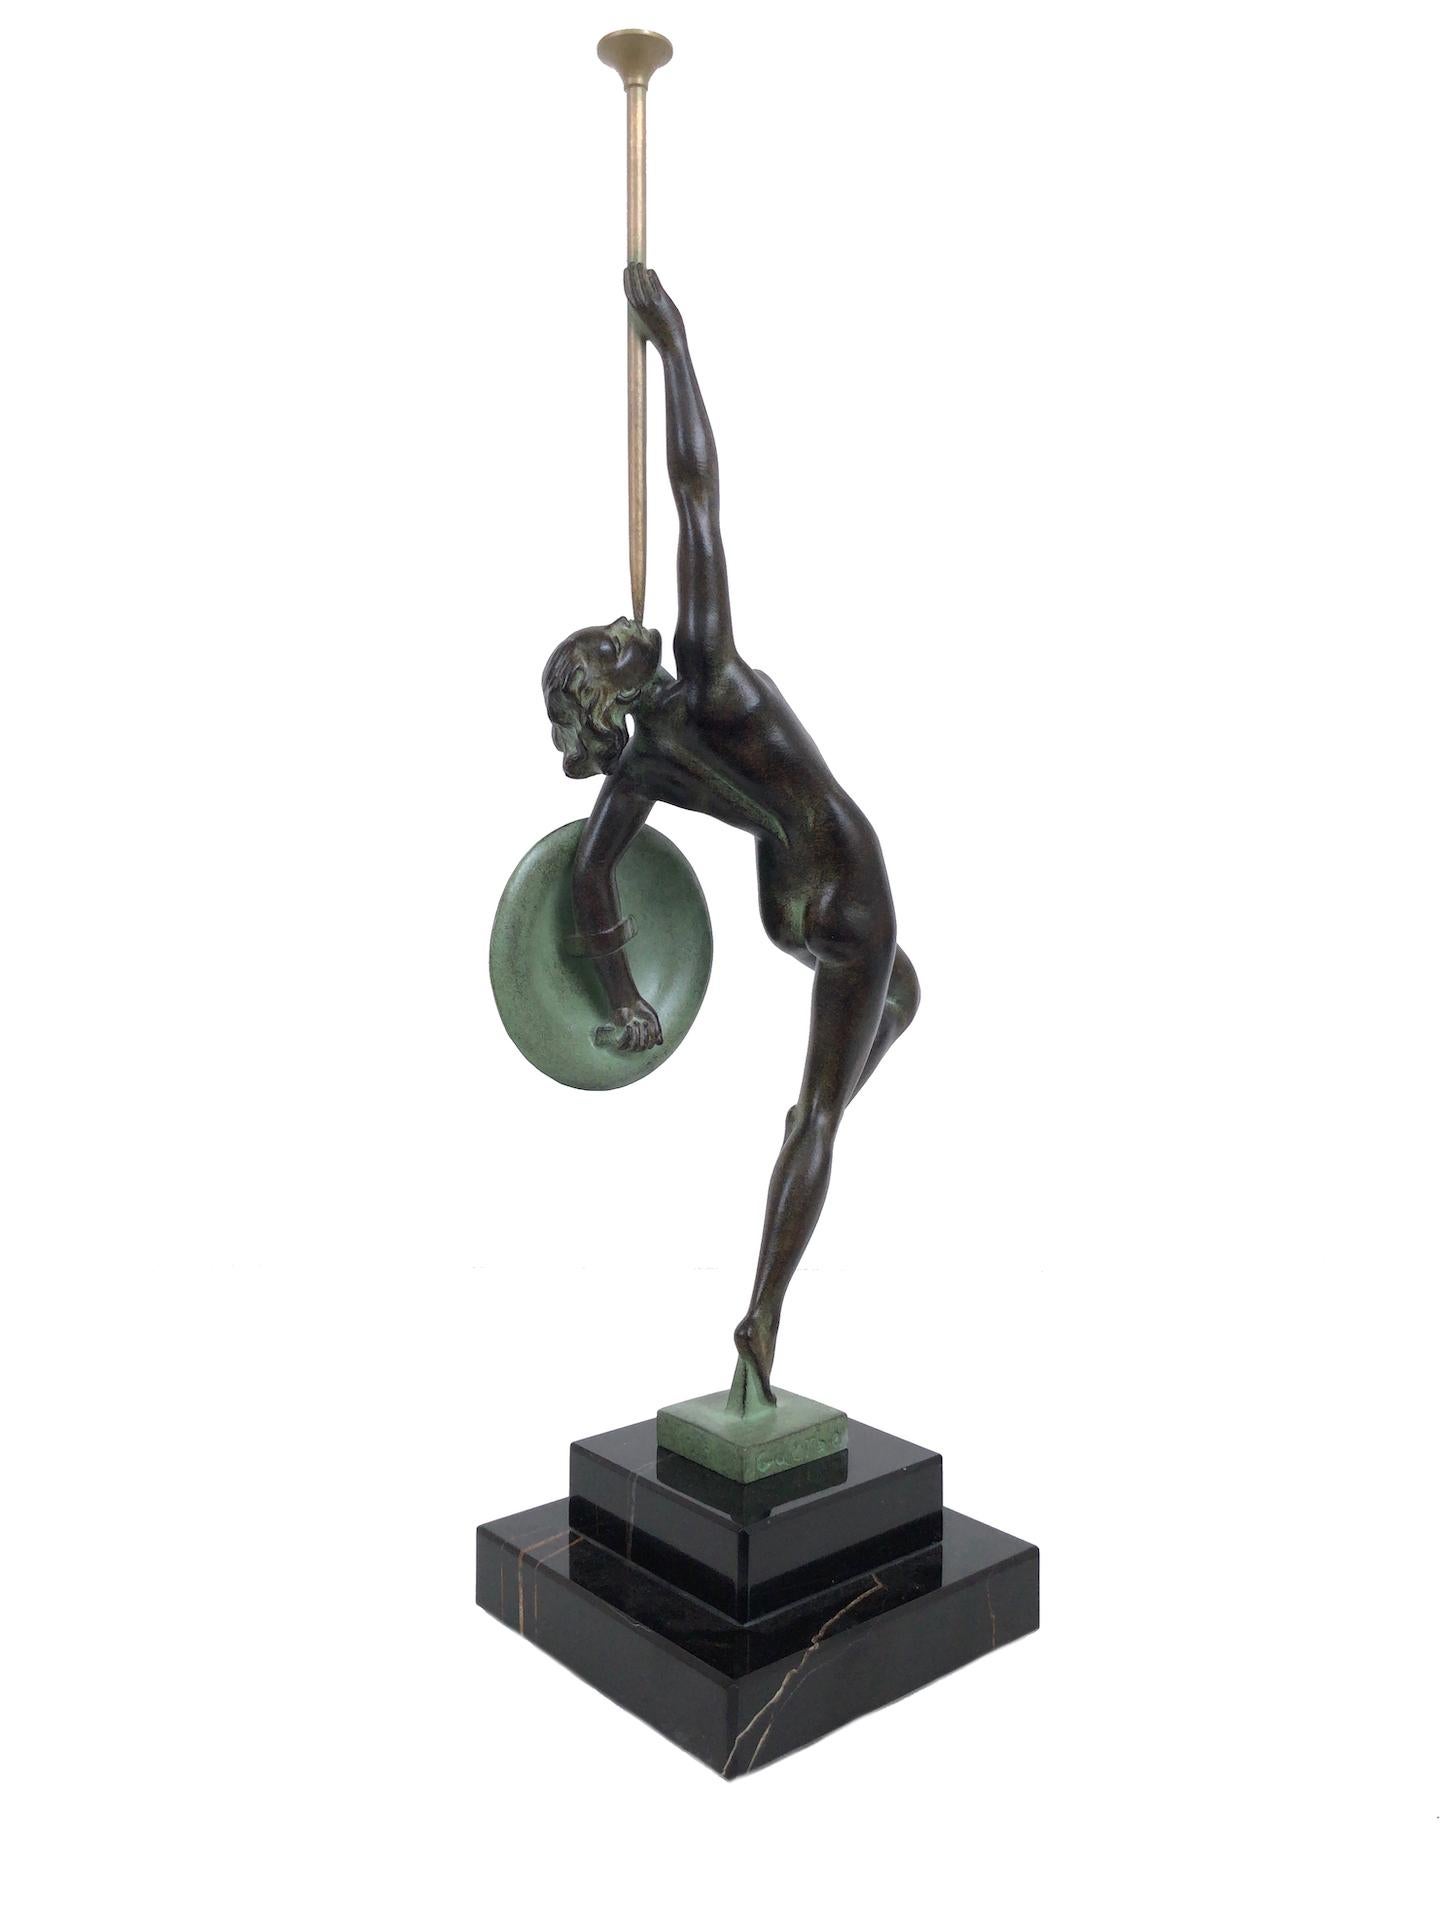 Spelter Jericho Trumpet Sculpture from Raymonde Guerbe by Max Le Verrier Art Deco Style